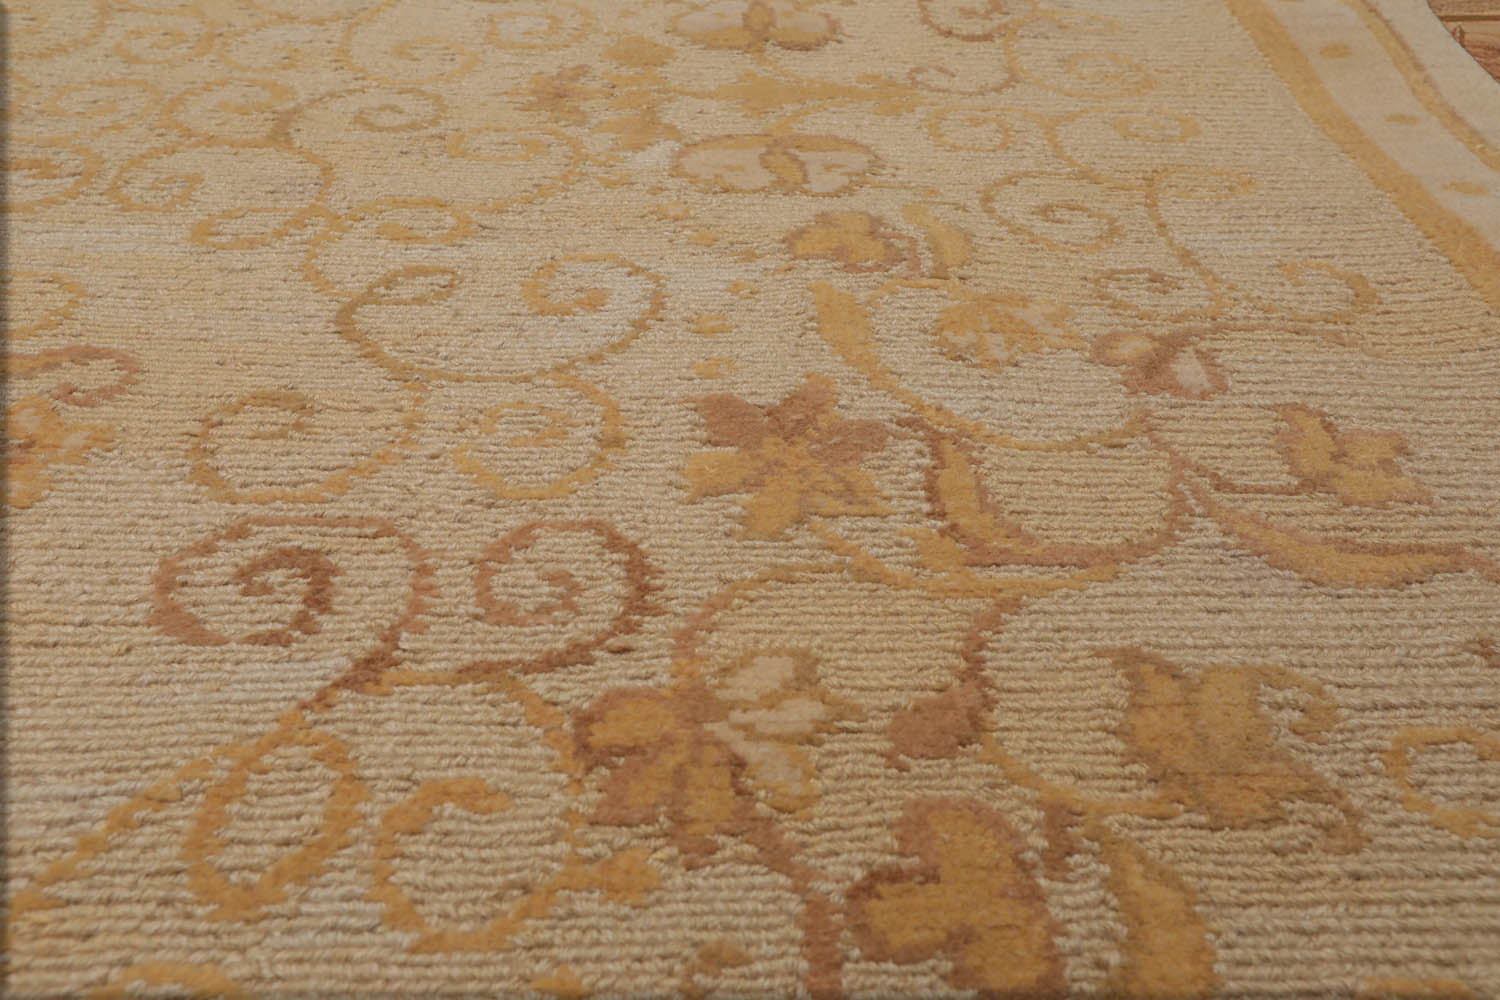 Juvens 6x9 Hand Knotted French Aubusson Savonnerie 100% Wool Asmara Traditional Oriental Area Rug Moss, Gold Color